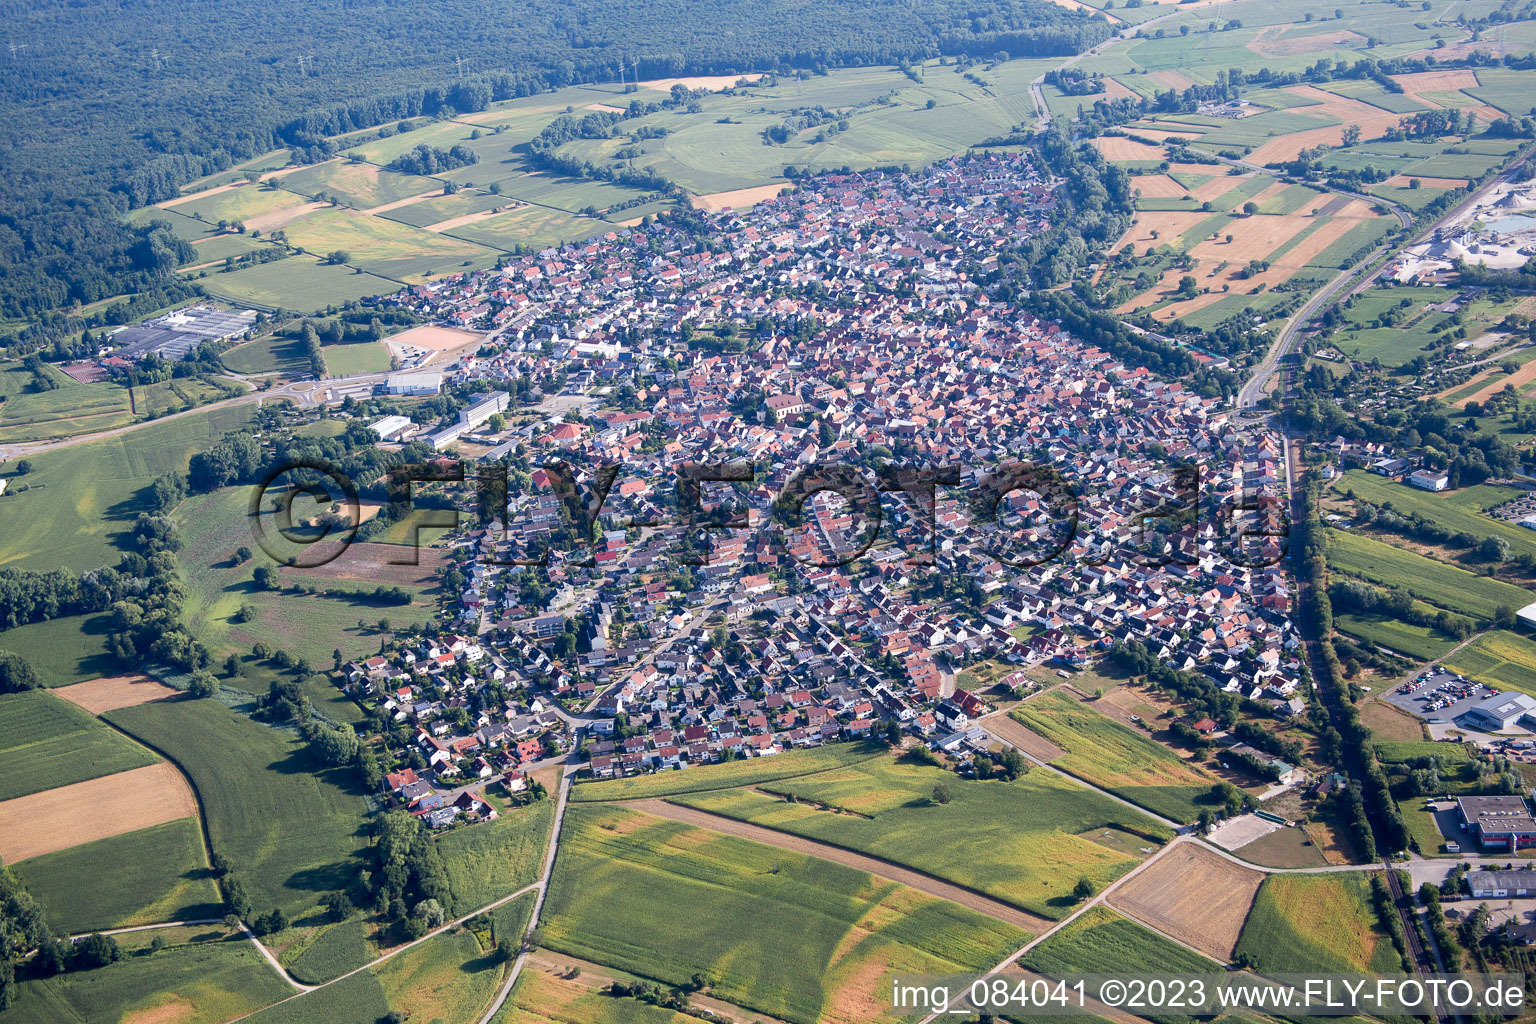 Drone image of Hagenbach in the state Rhineland-Palatinate, Germany